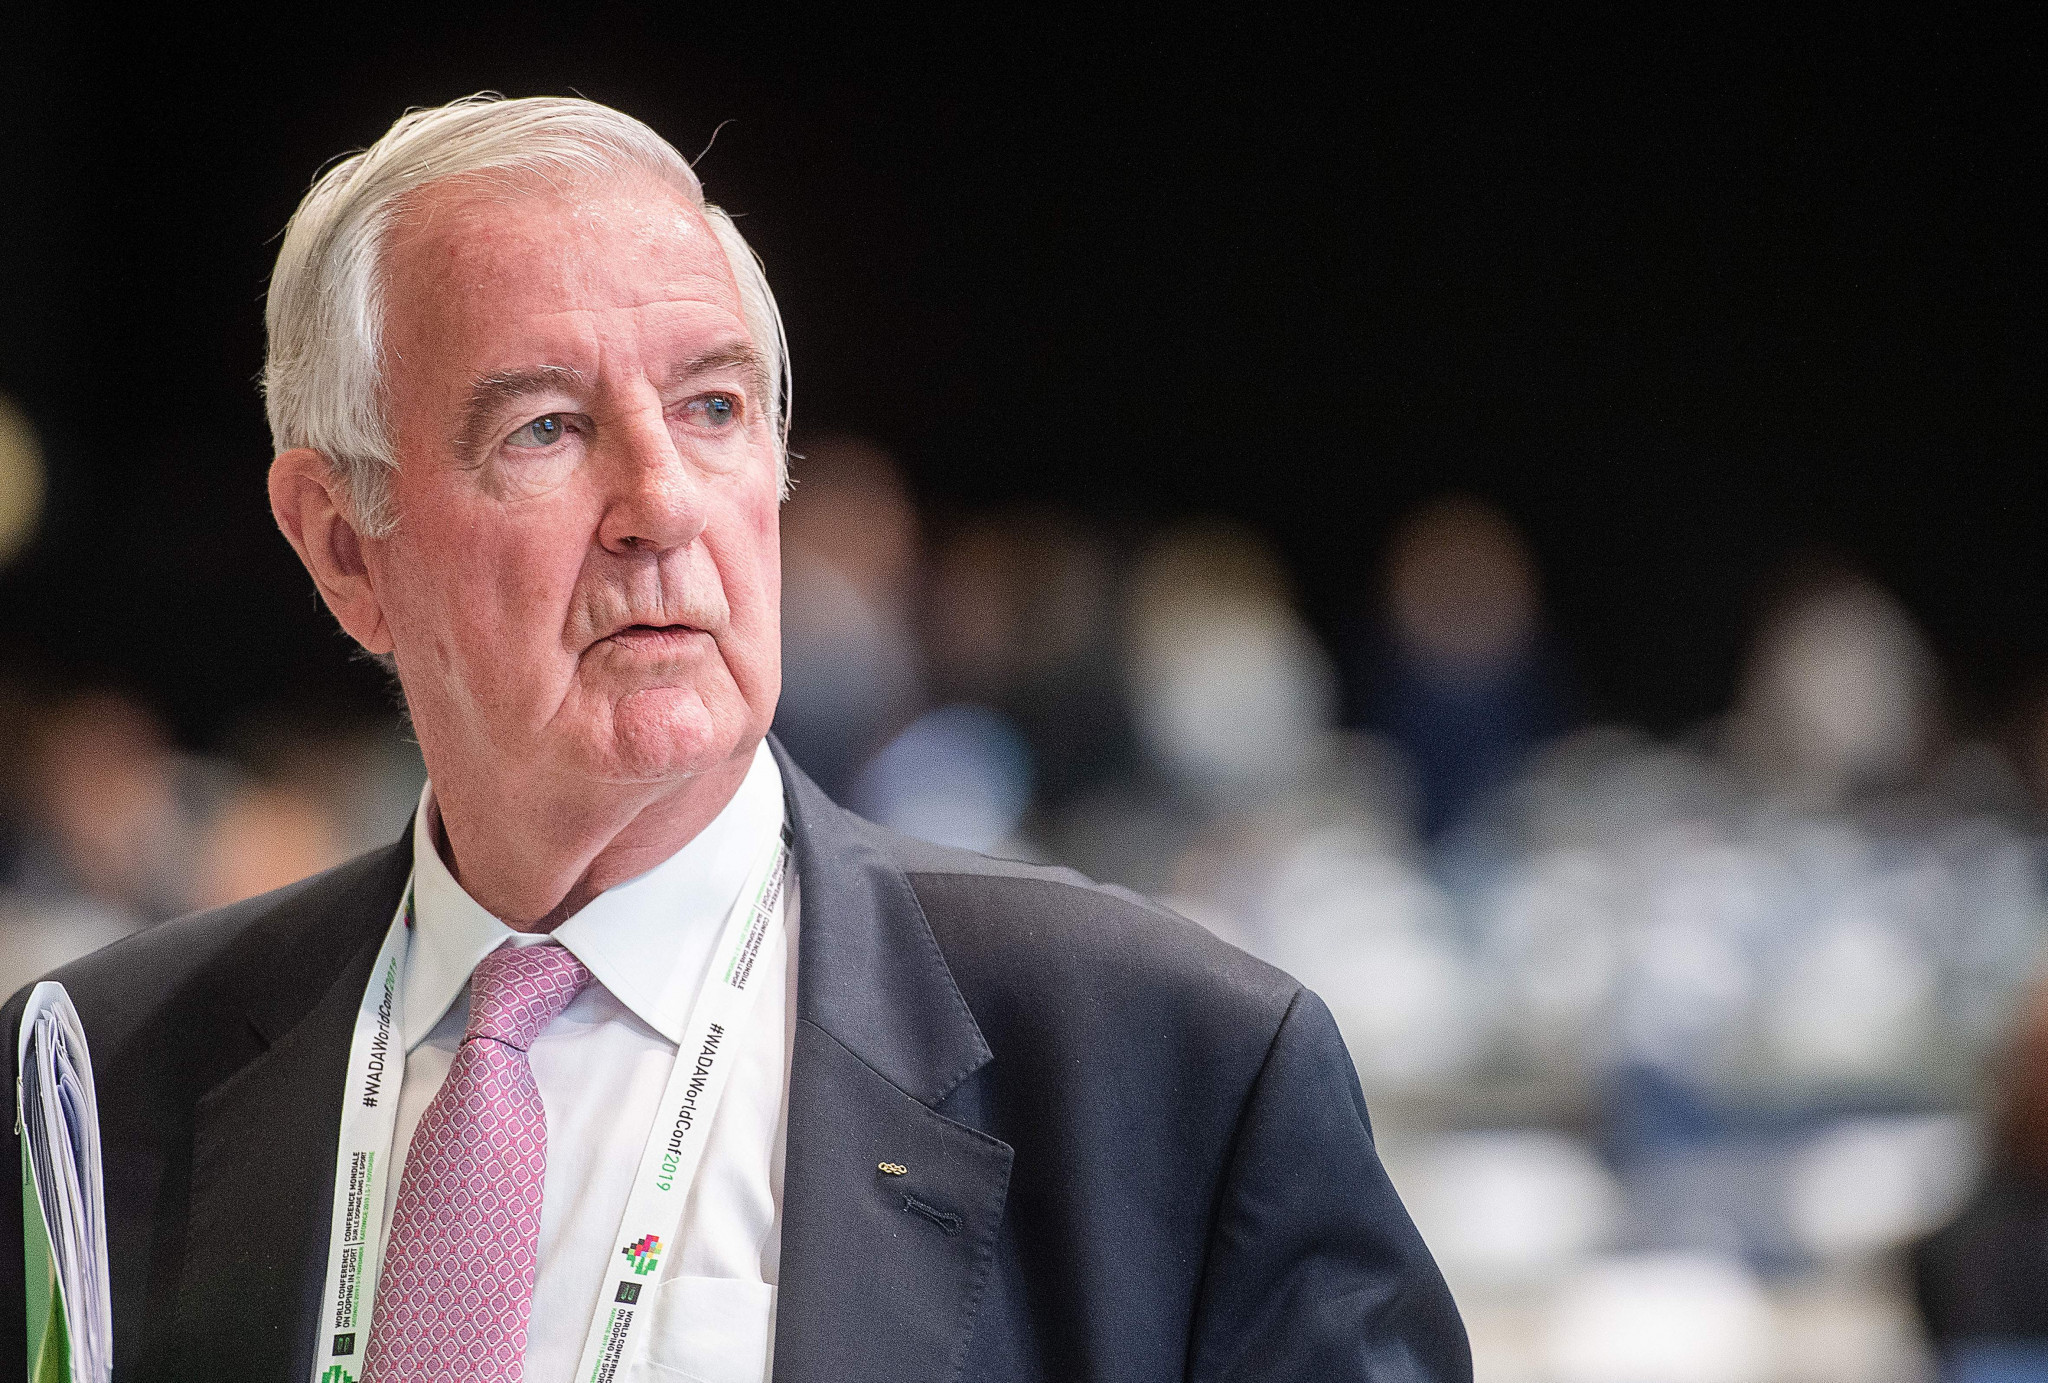 Honorary IOC member Sir Craig Reedie has recognised Russian and Belarusian athletes faced difficulties qualifying for Paris 2024 due to sanctions against them ©Getty Images